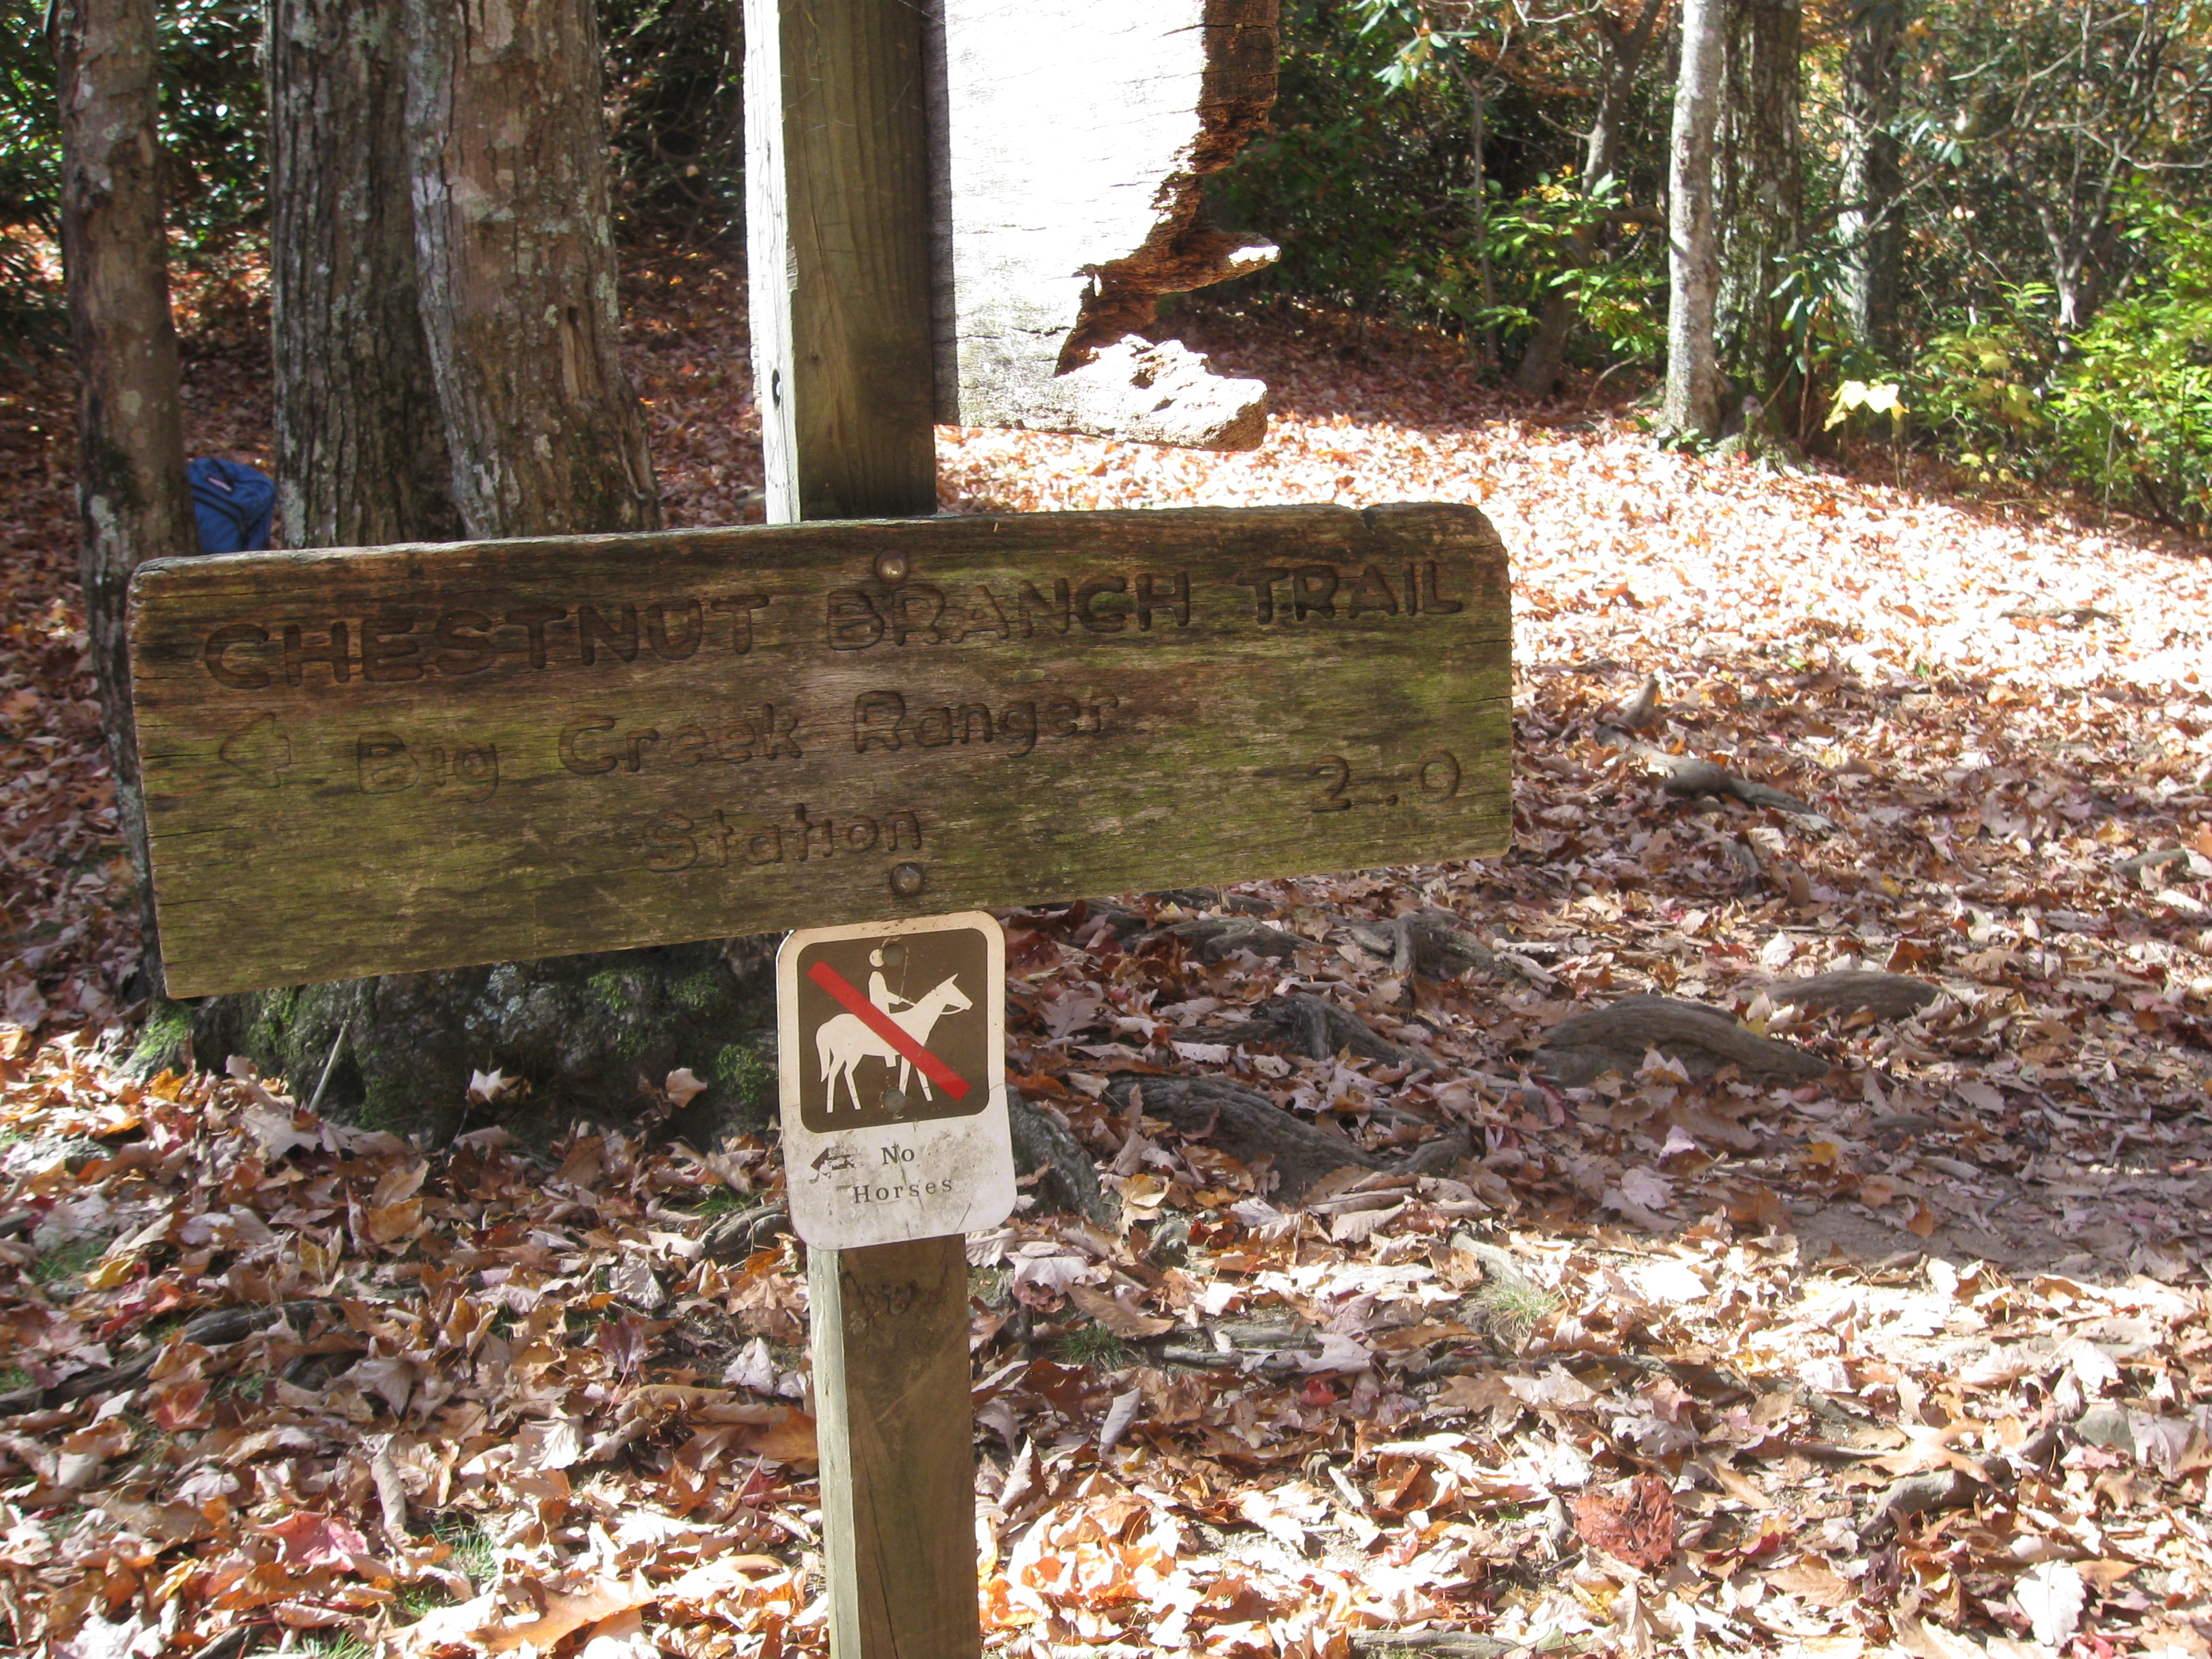 Appalachian Trail Intersection with Chestnut Branch Trail